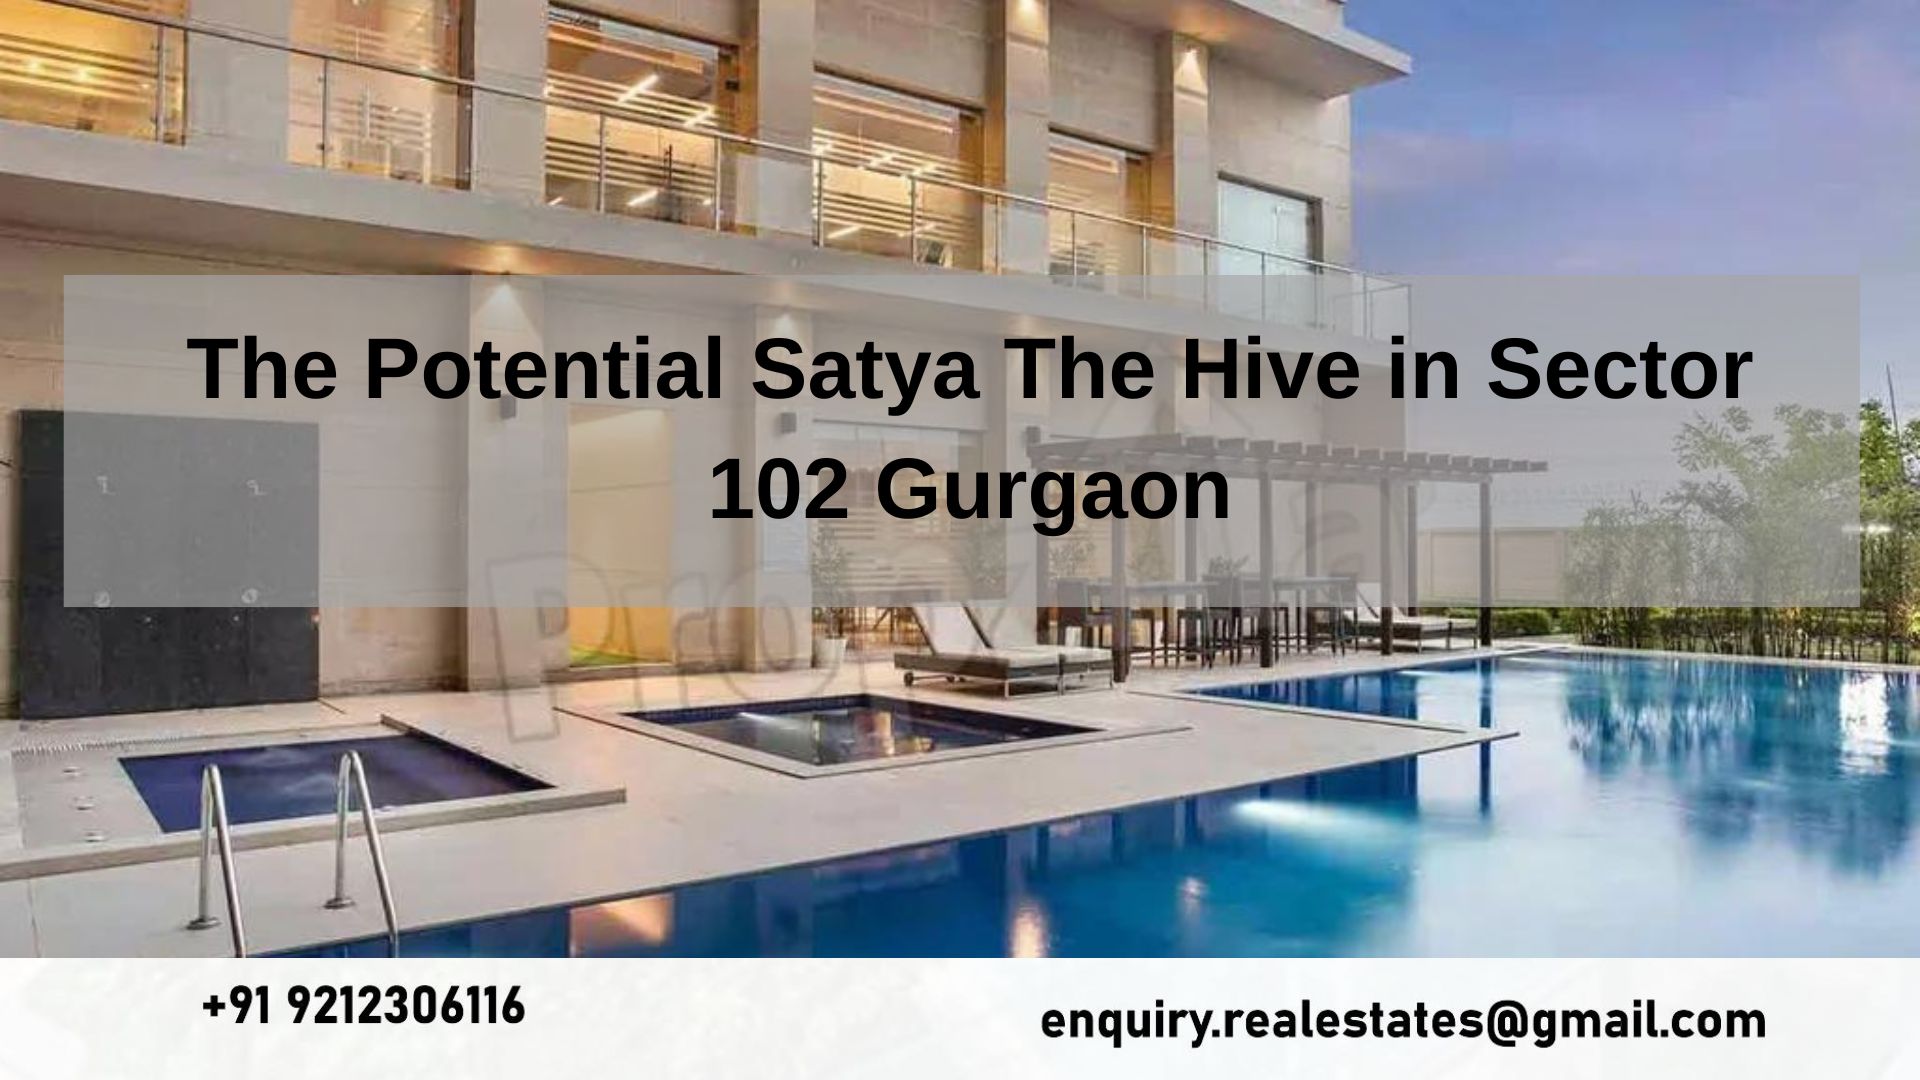 The Potential Satya The Hive Sector 102 Gurgaon